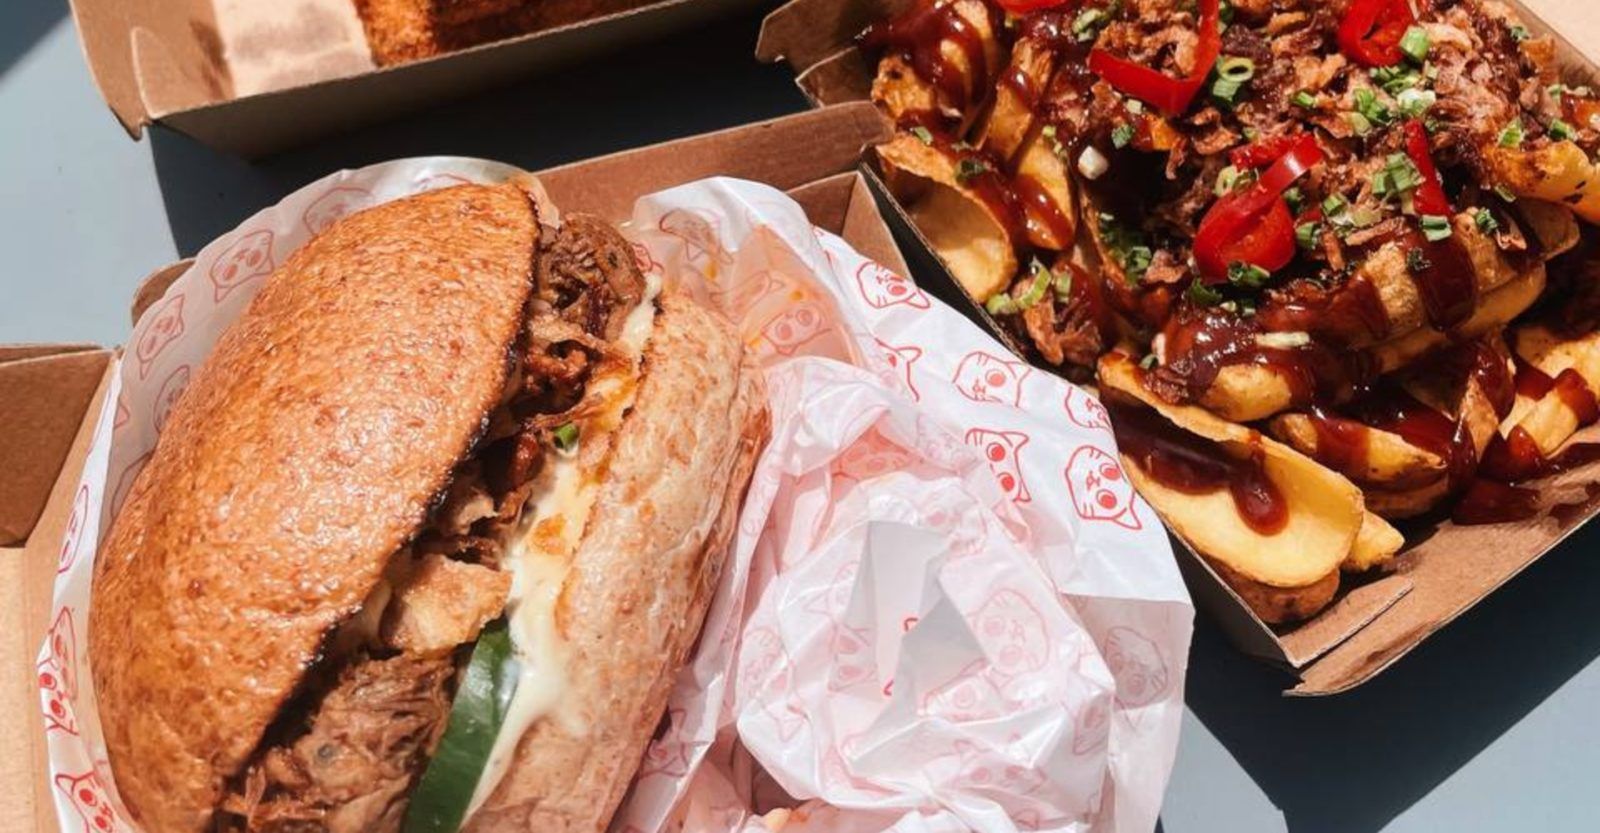 Tiga Roti: What to expect at wildly popular burger brand Three Buns’ new Halal-friendly concept